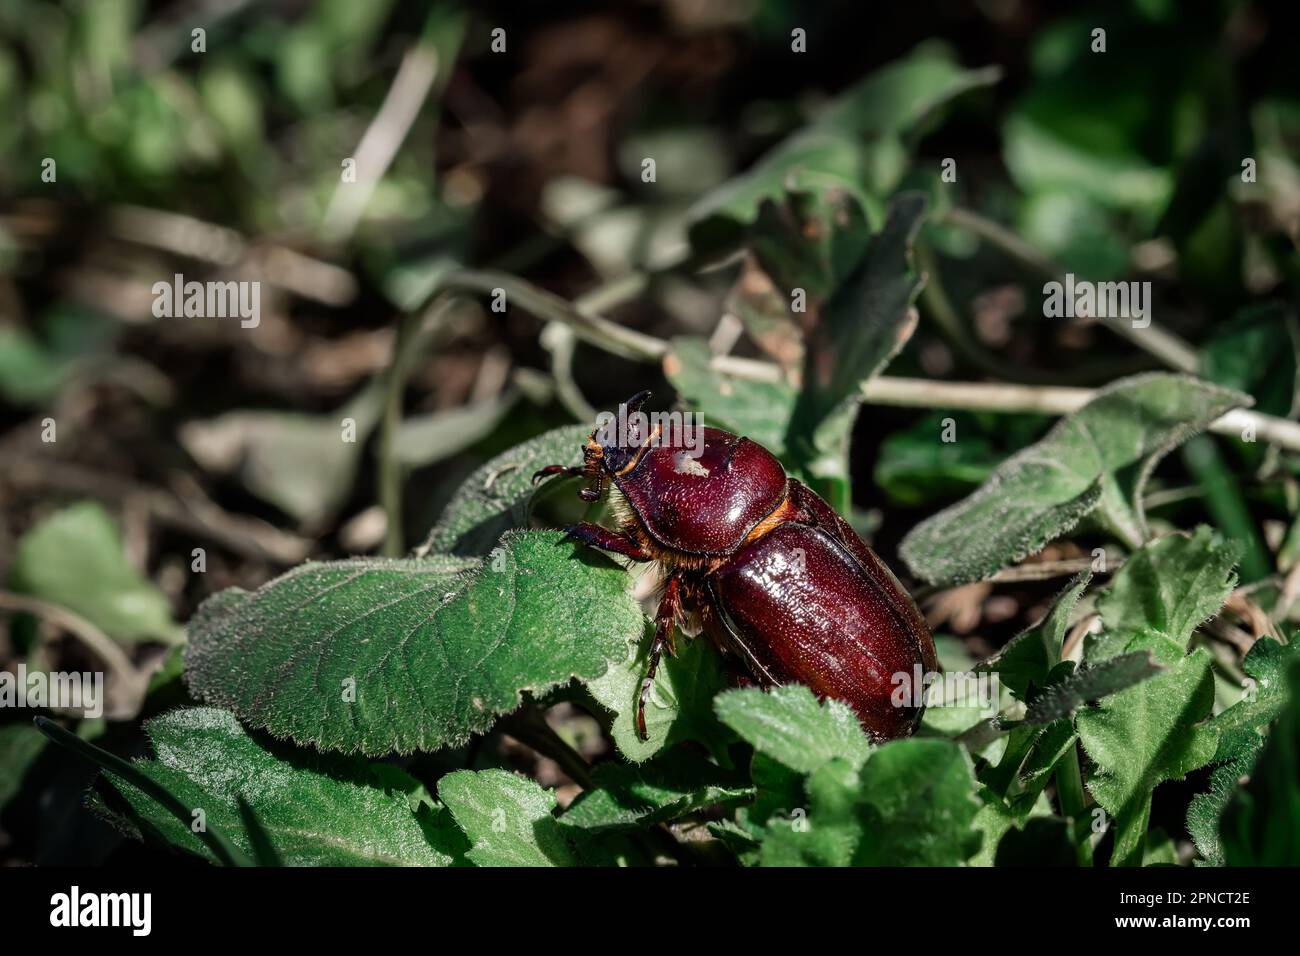 European rhinoceros beetle on on green grass in spring. concept of nature conservation Stock Photo